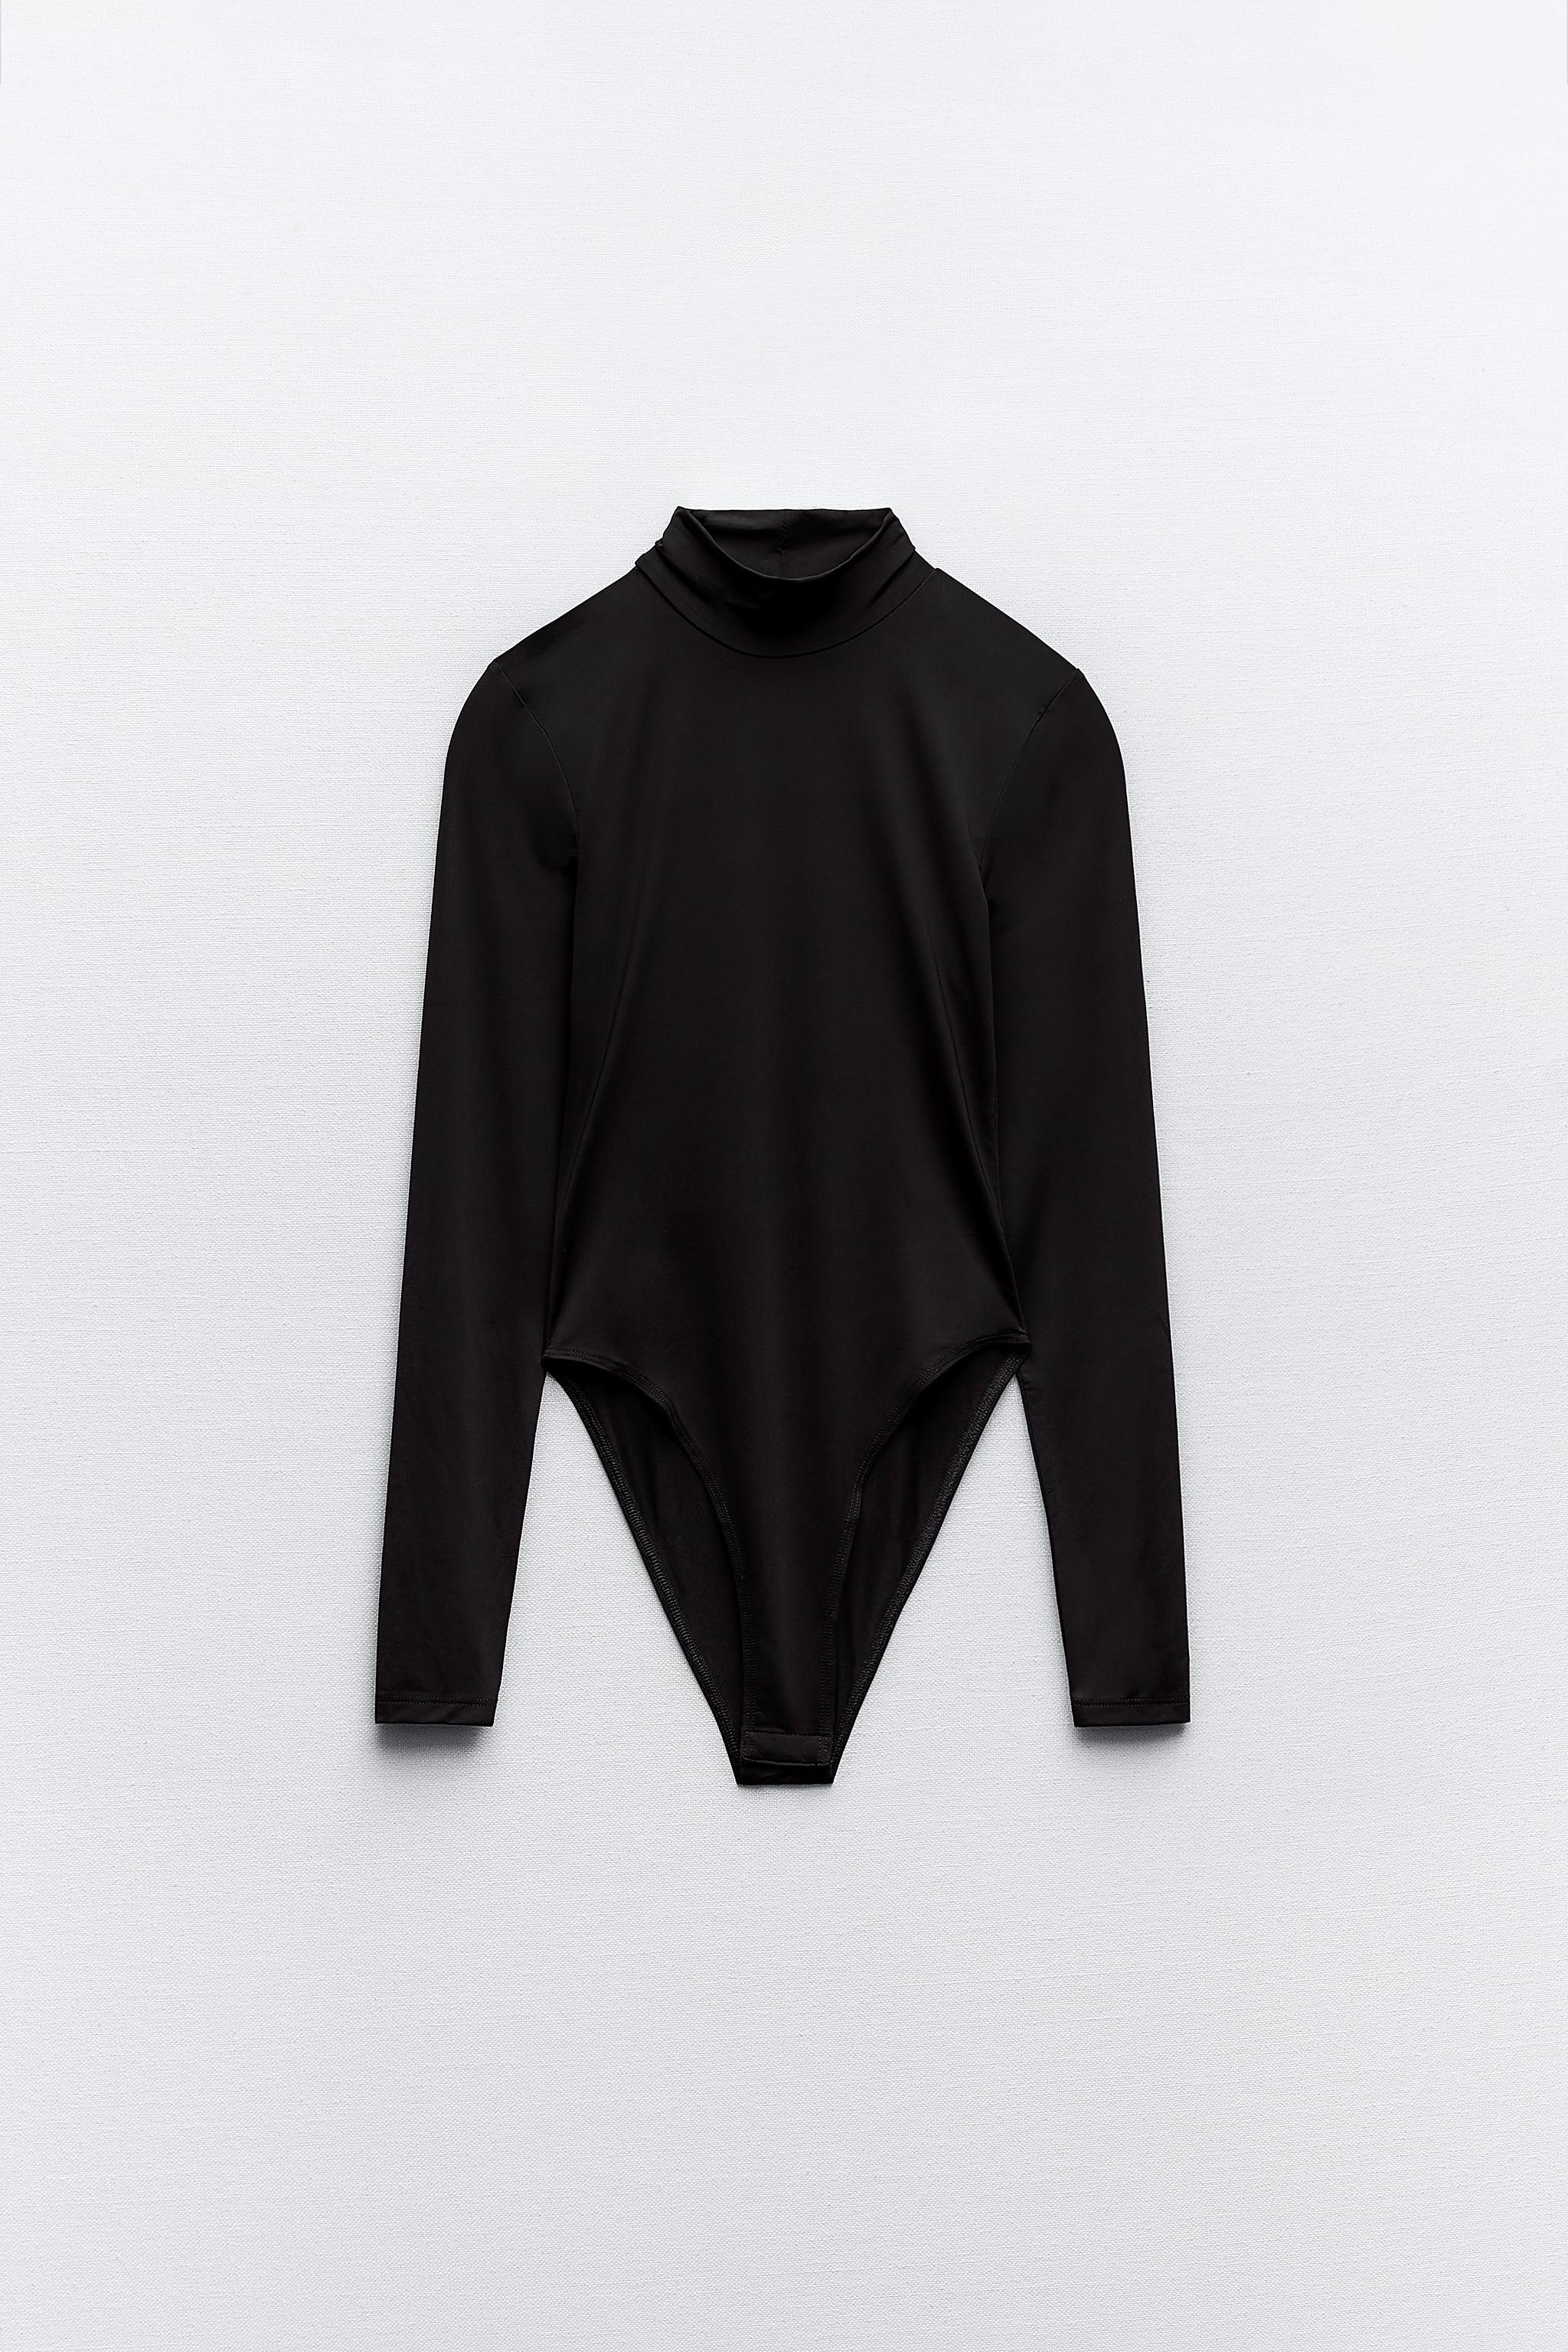 Has anyone had success finding a bra to wear under this iconic Zara  bodysuit? I have it in black and white. I wanted to wear it with a blazer  to work but